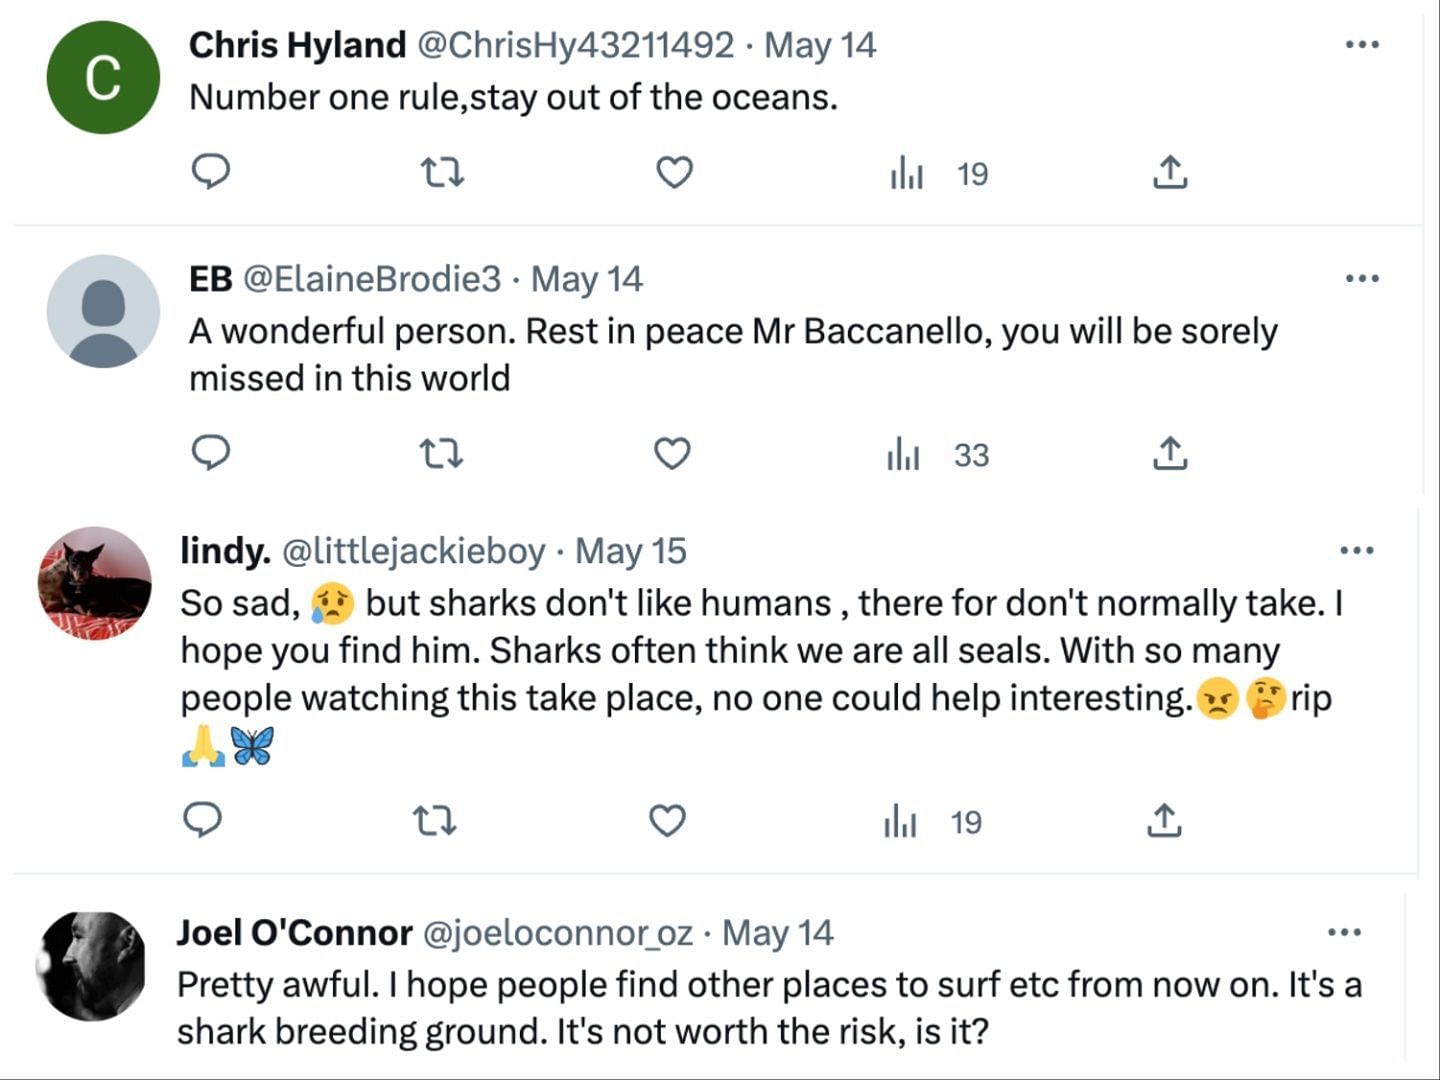 Social media users share tributes as Simon, a school teacher, goes missing after a disturbing shark attack last week: Reactions explored. (image via Twitter)